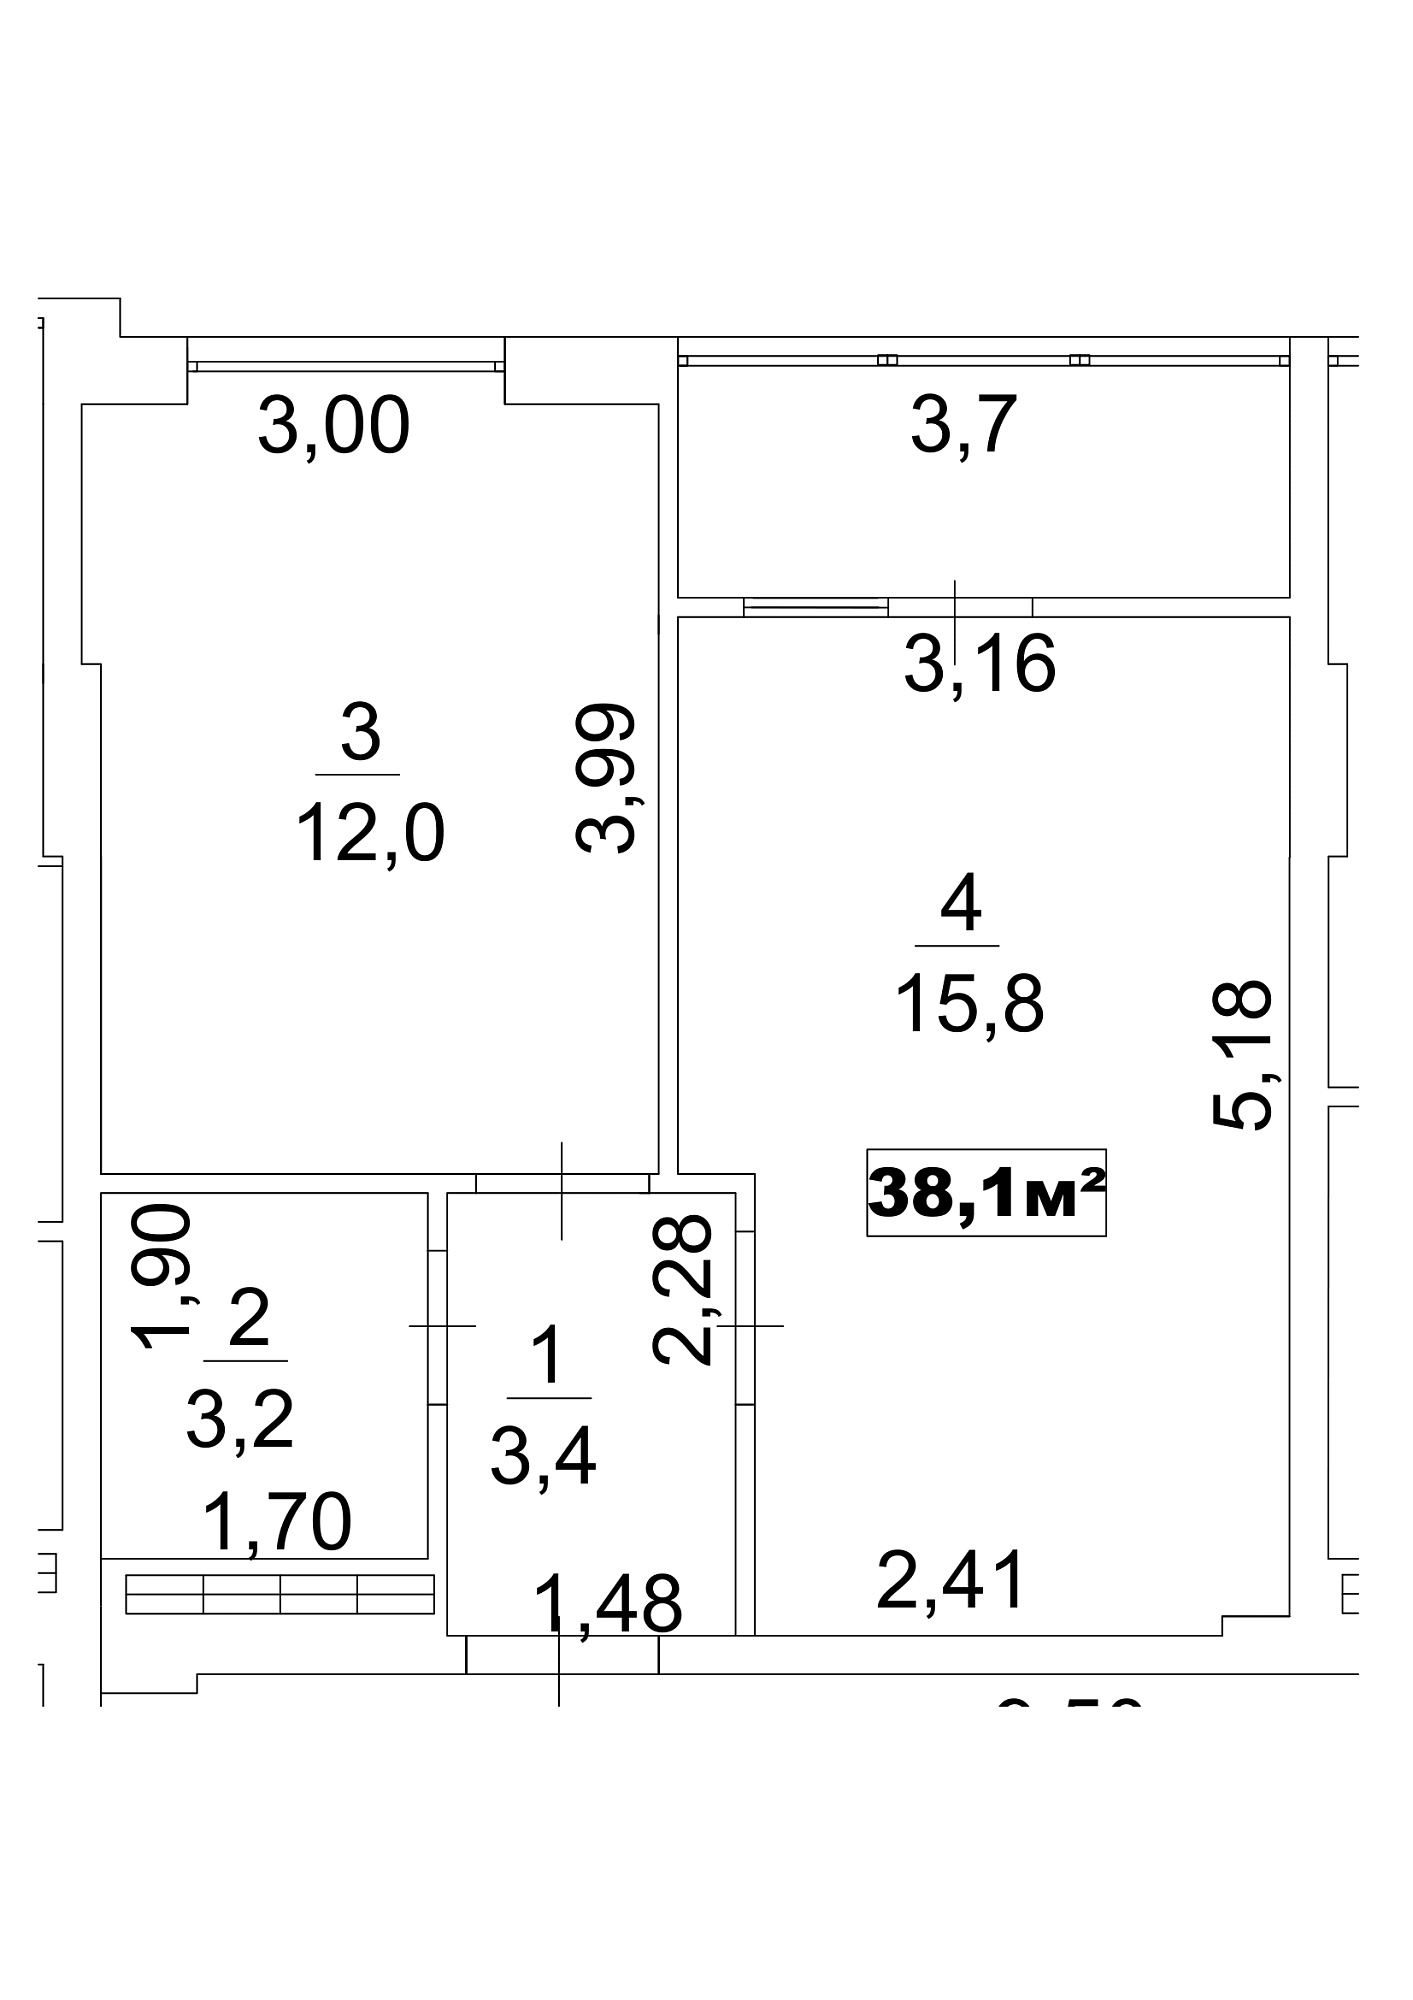 Planning 1-rm flats area 38.1m2, AB-13-03/00021.